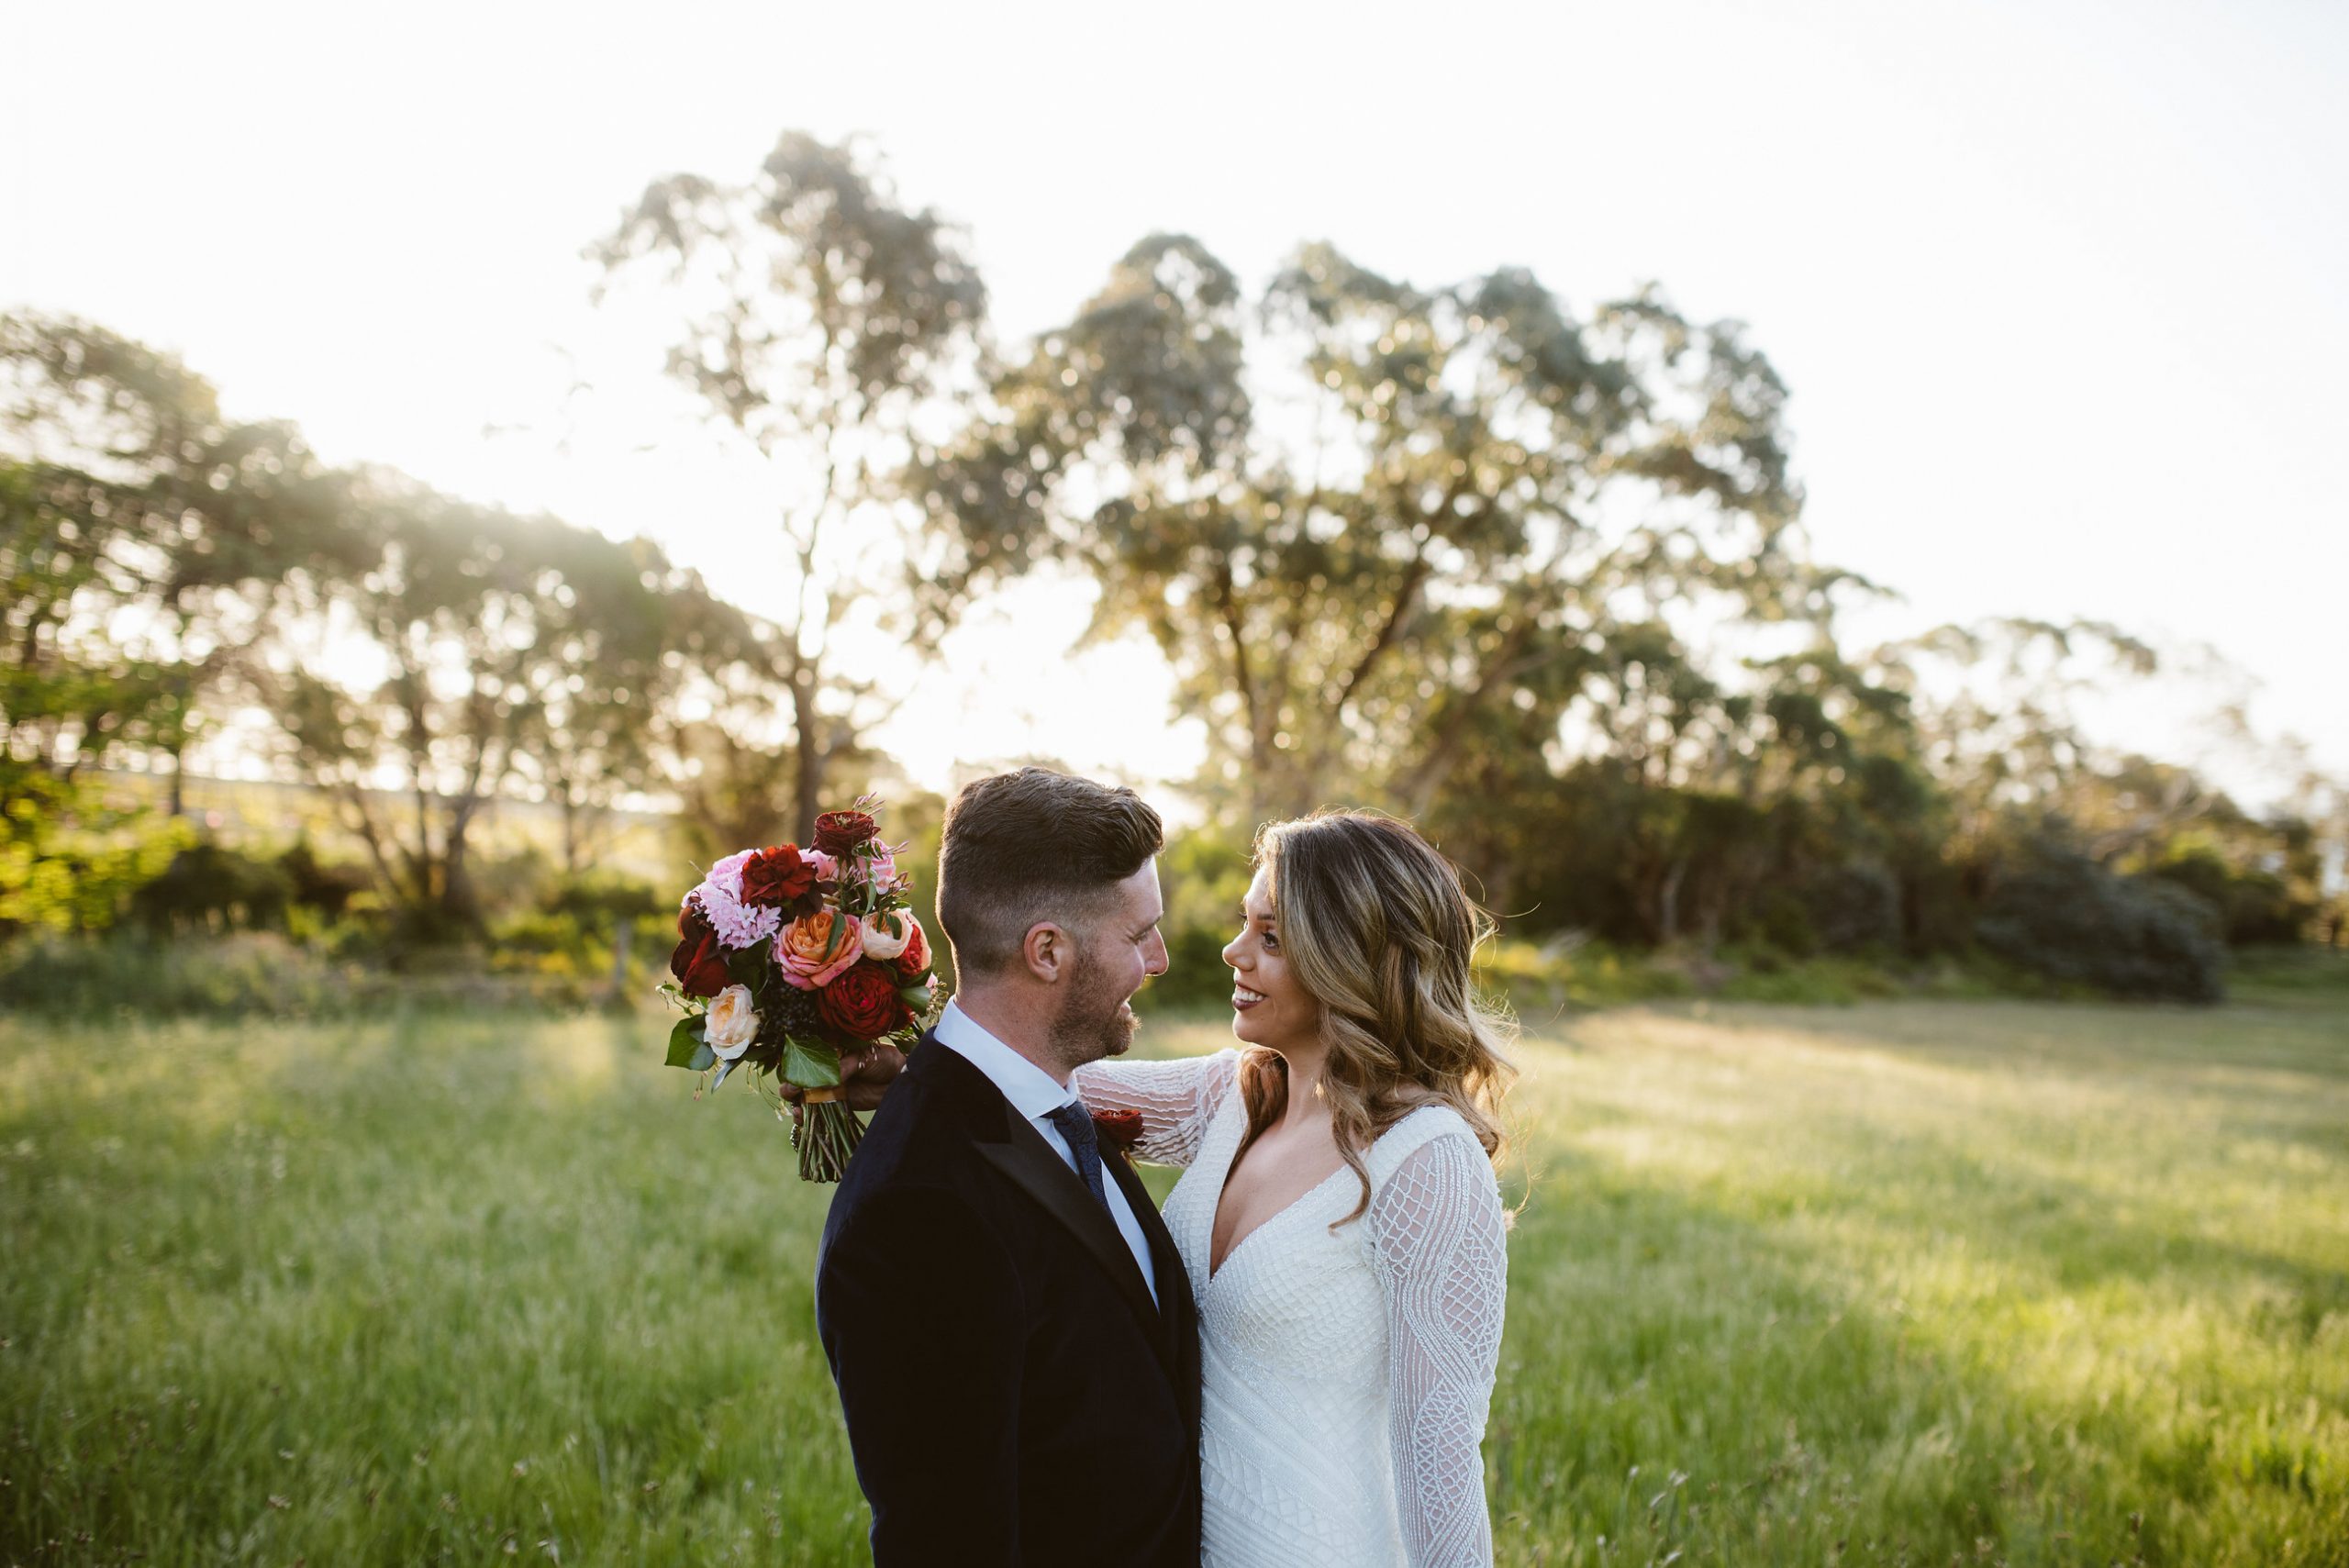 wedding planning, wedding styling, wedding planner melbourne, bride and groom, wedding planner, wedding stylist, melbourne wedding stylist, melbourne wedding planner, terindah estate, winery weddings, winery, victoria winery, bride to be